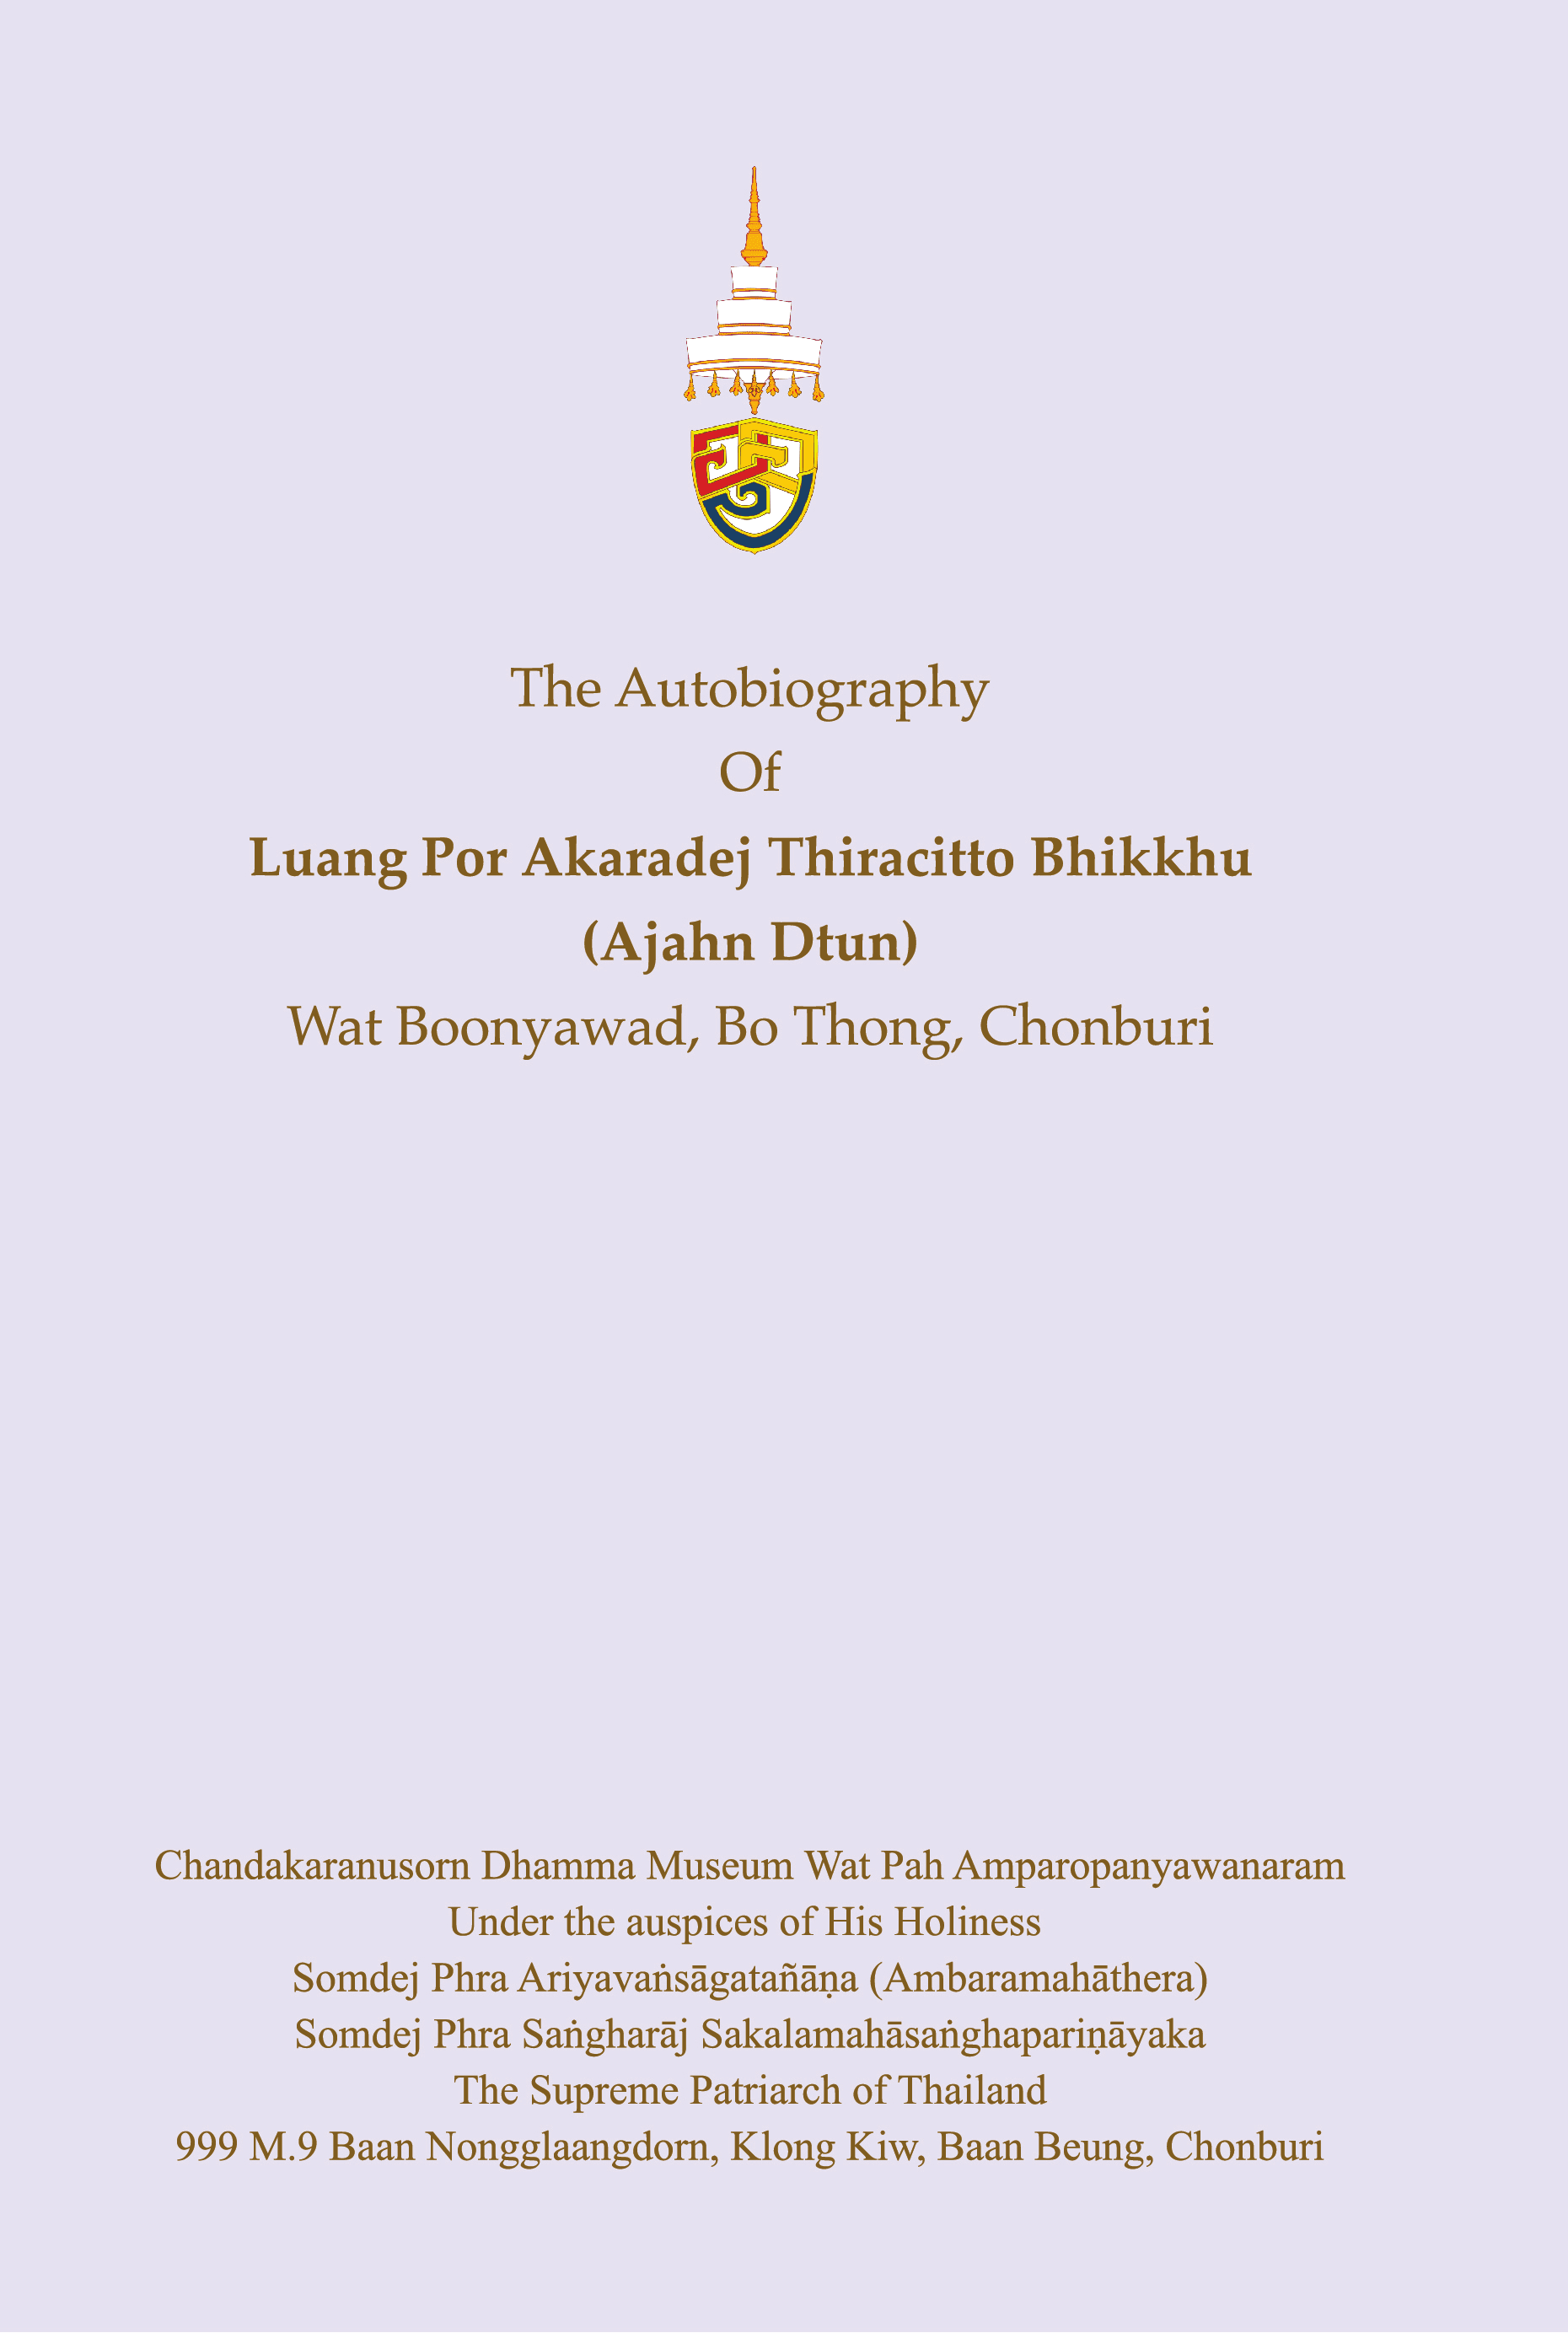 Mobile cover image for The Autobiography and Dhamma Teachings Of Luang Por Akaradej Thiracitto Bhikkhu